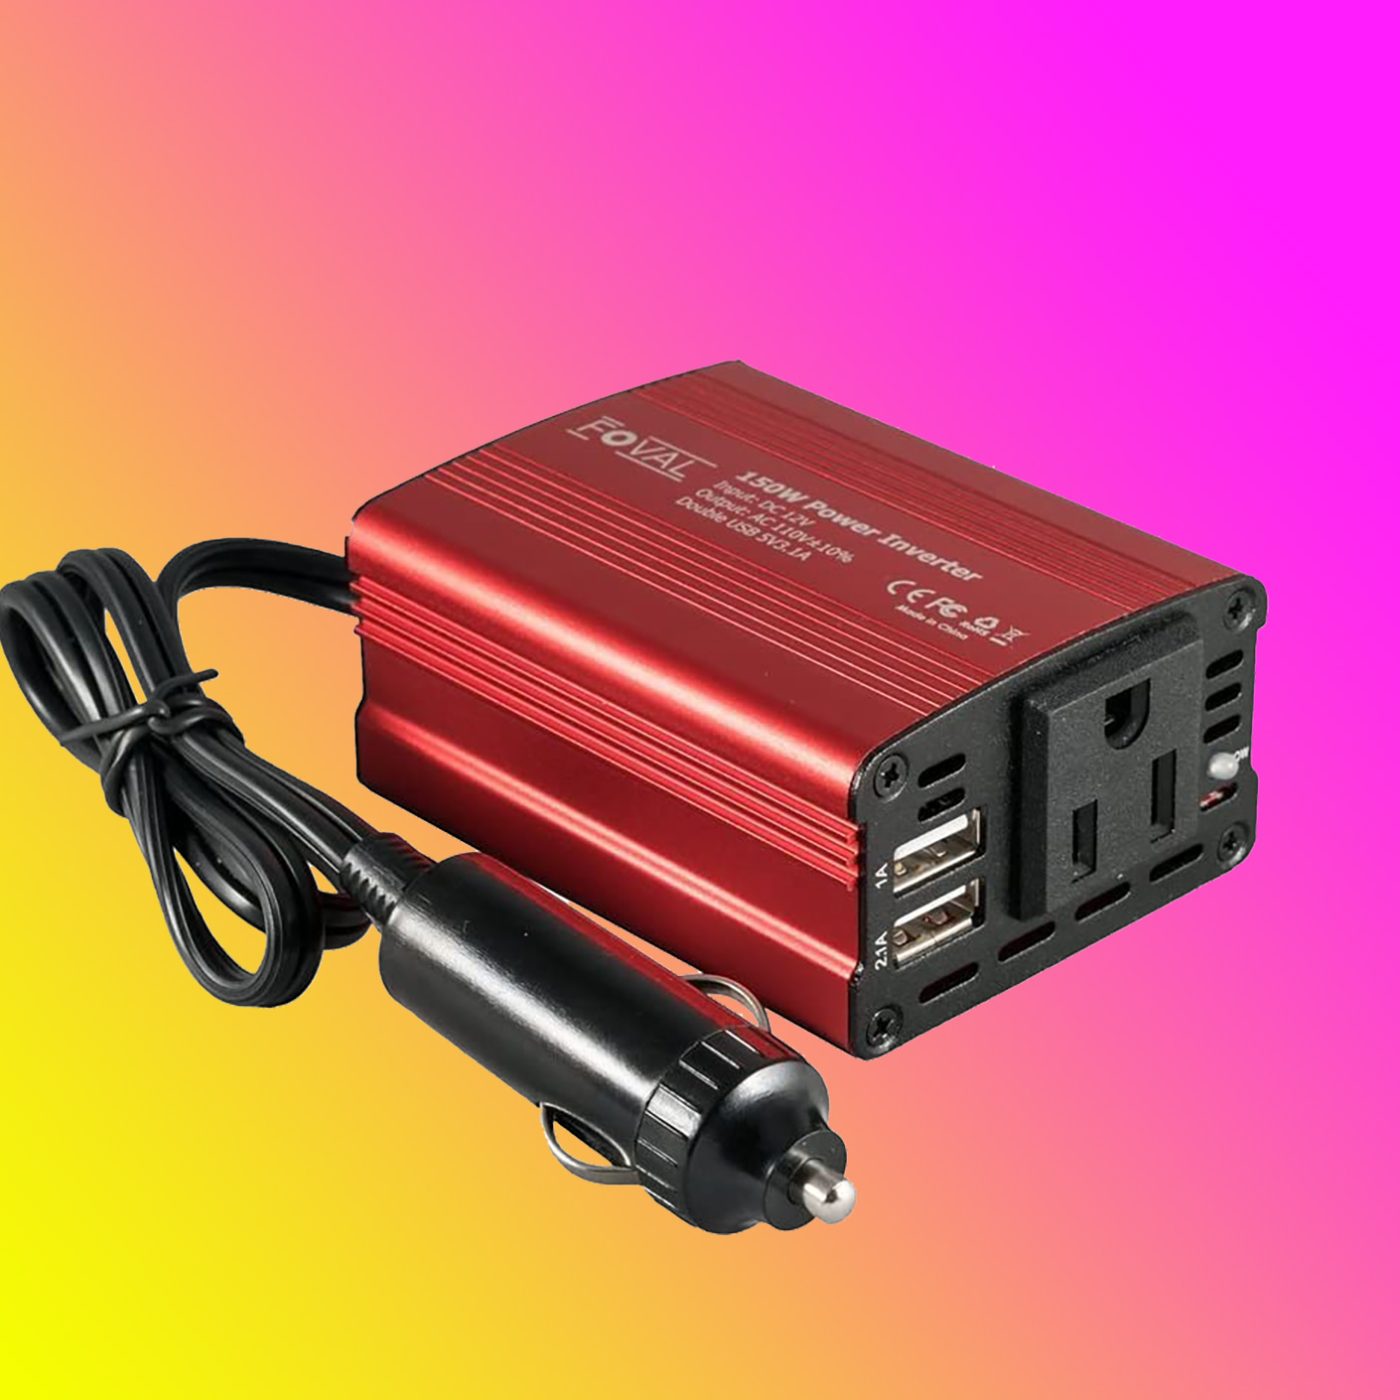 Power Inverter For Car: Power a laptop, PS5, or even a TV in your car